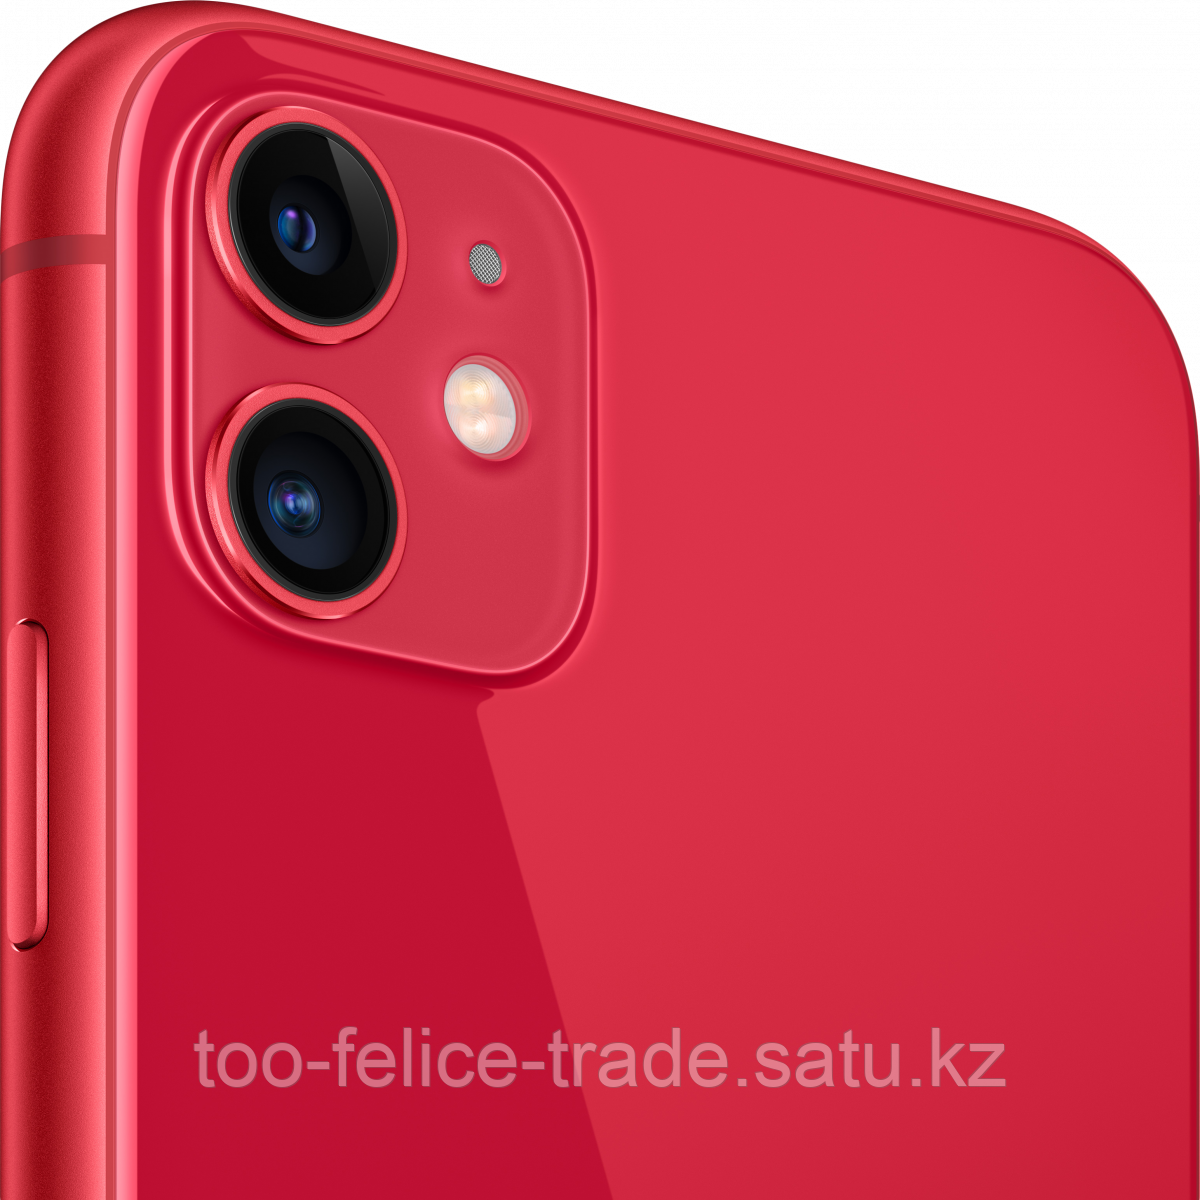 IPhone 11 64GB (PRODUCT)RED, Model A2221 - фото 10 - id-p100683142